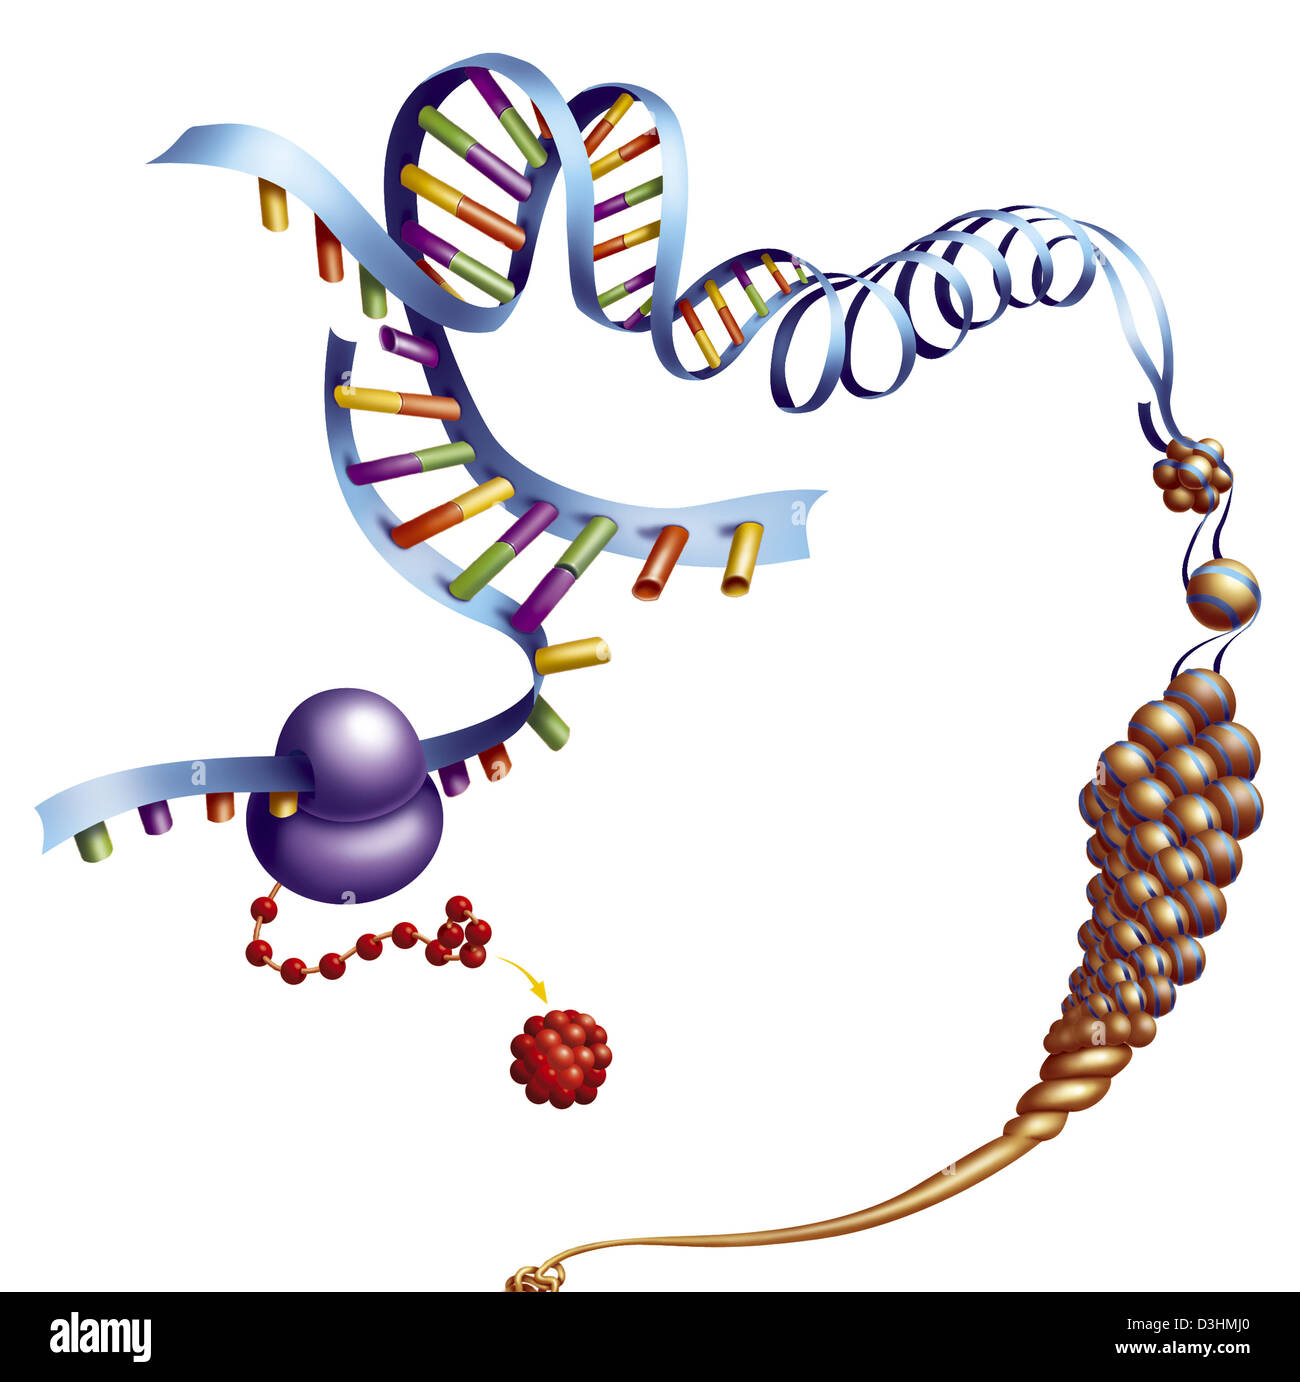 DNA COMPACTION Stock Photo